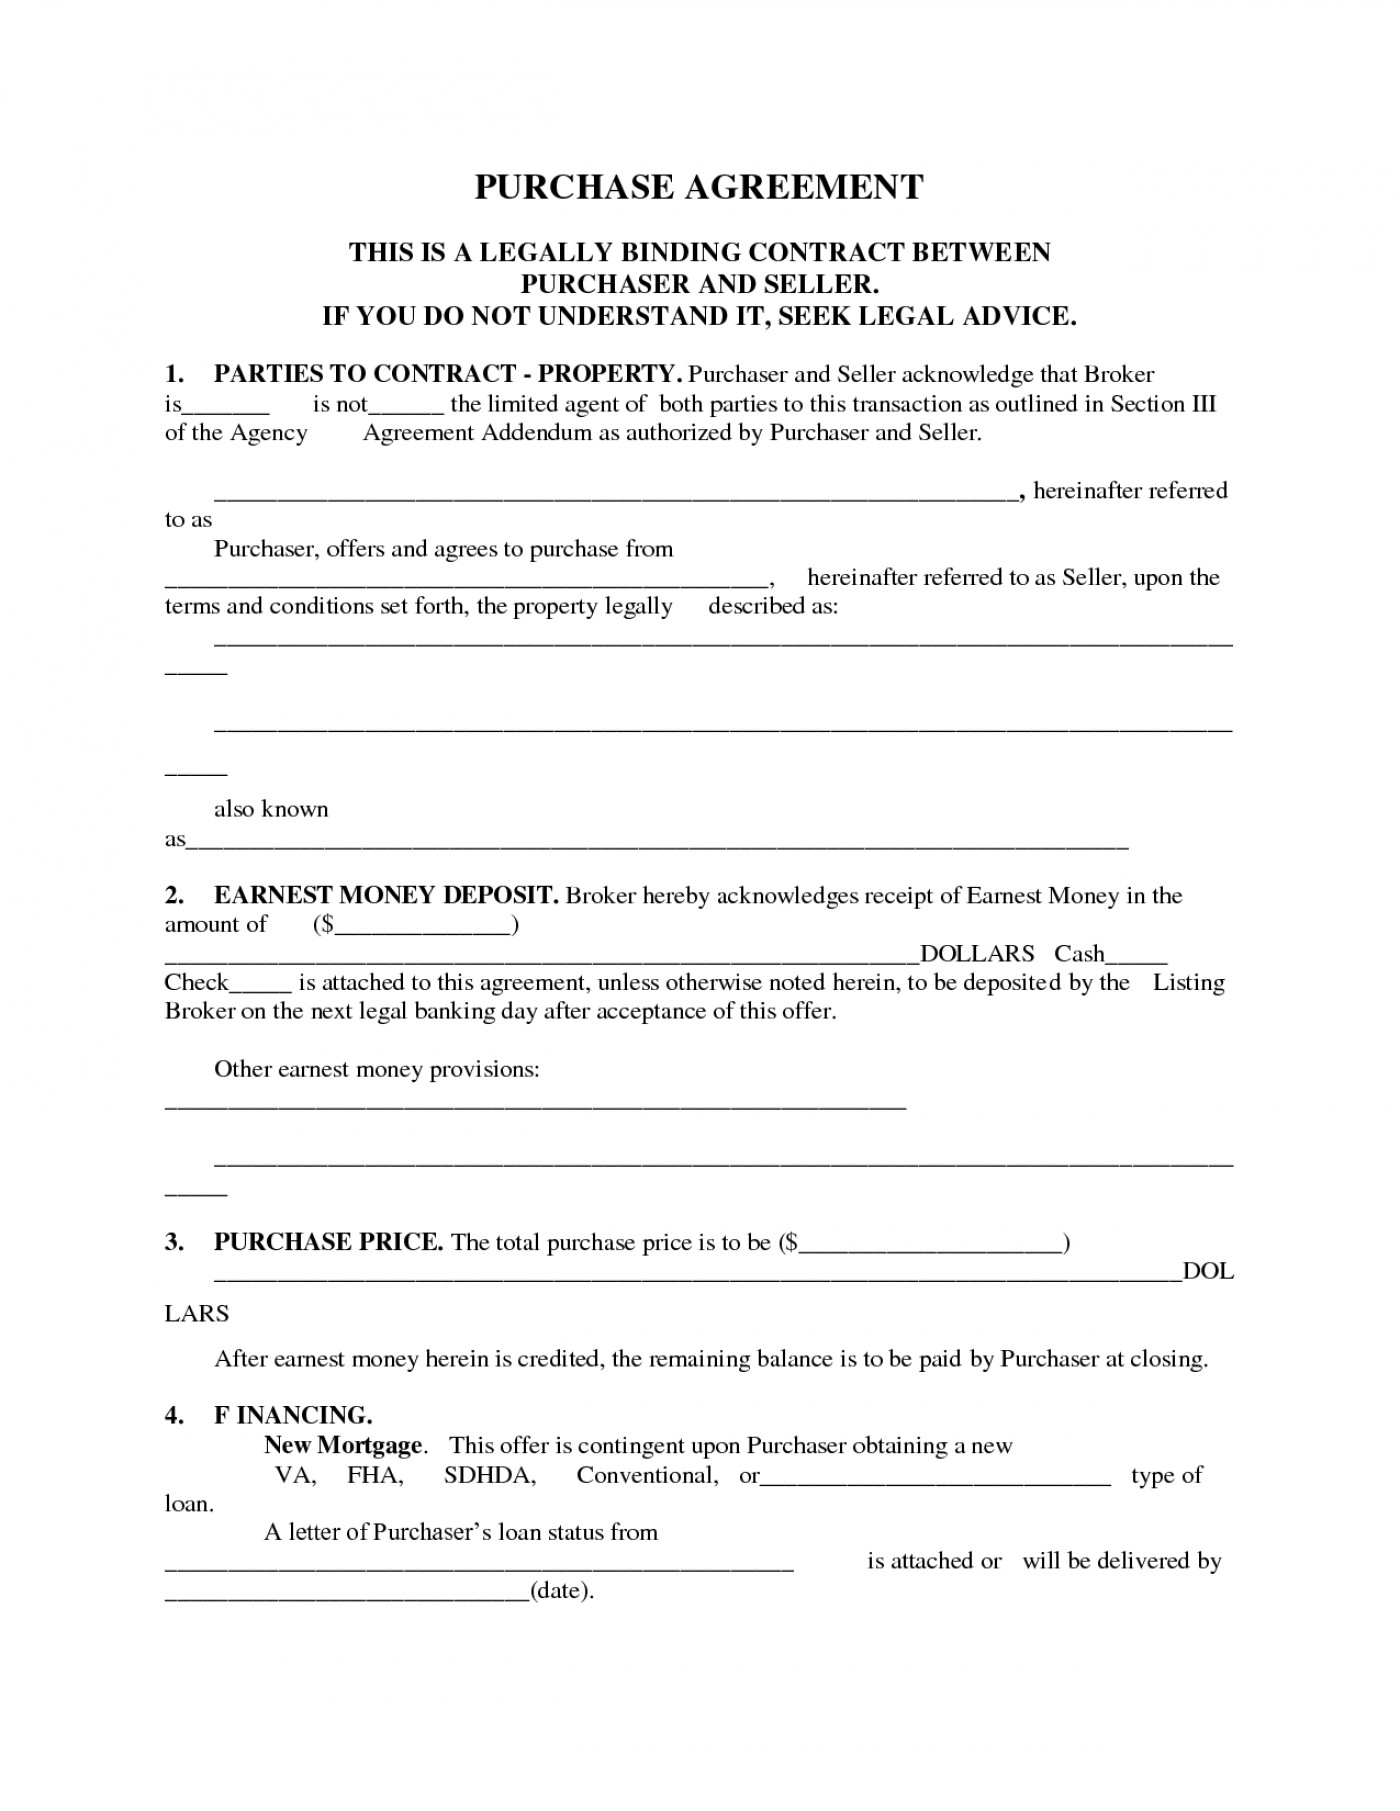 Bond Purchase Agreement Sample 018 Real Estate Contract Template Purchase Agreement For House